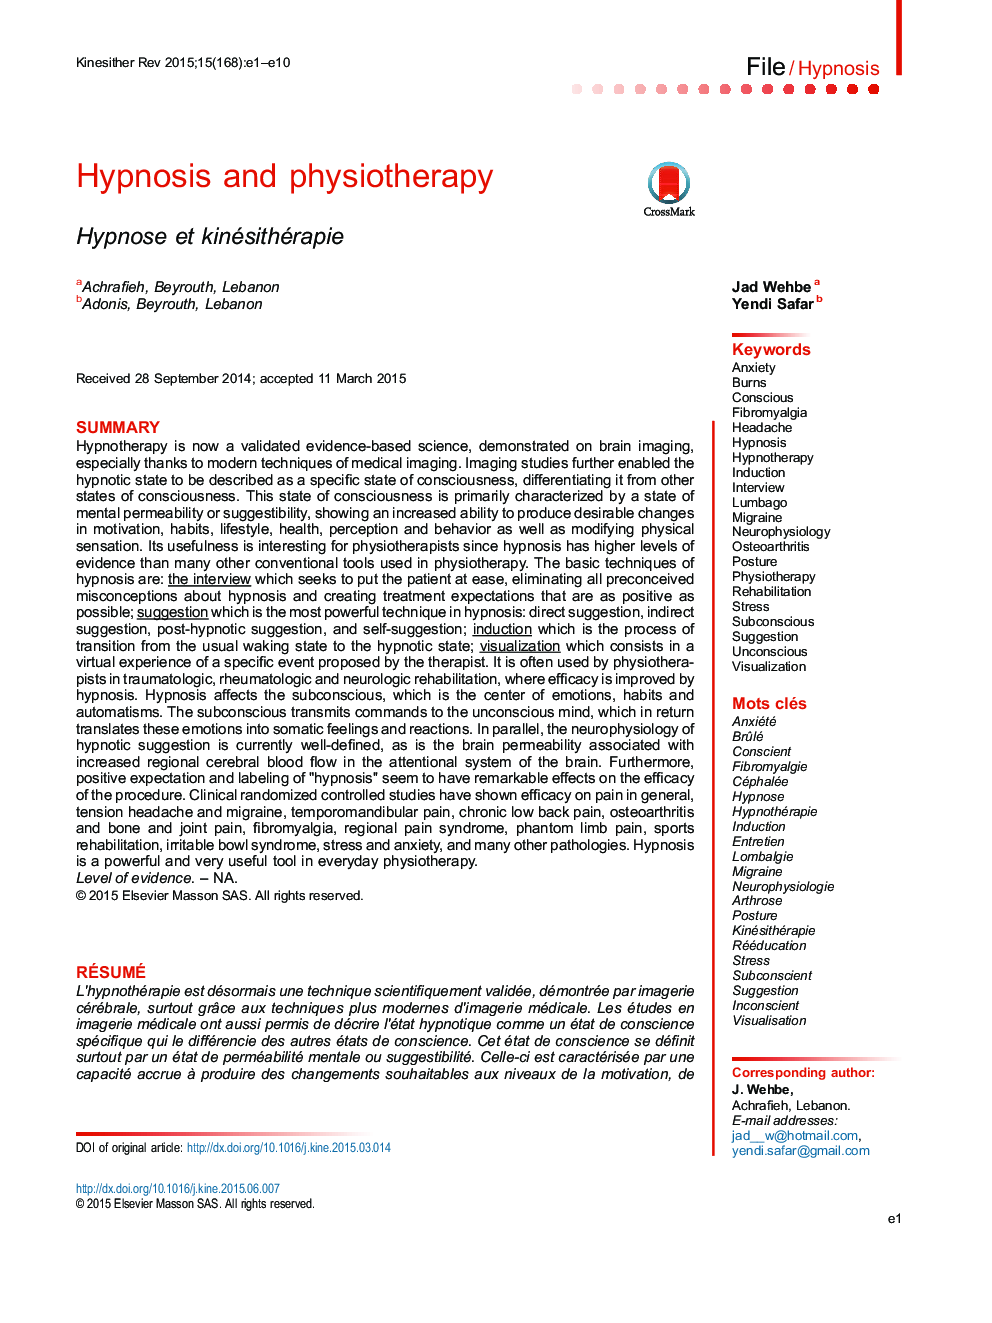 Hypnosis and physiotherapy